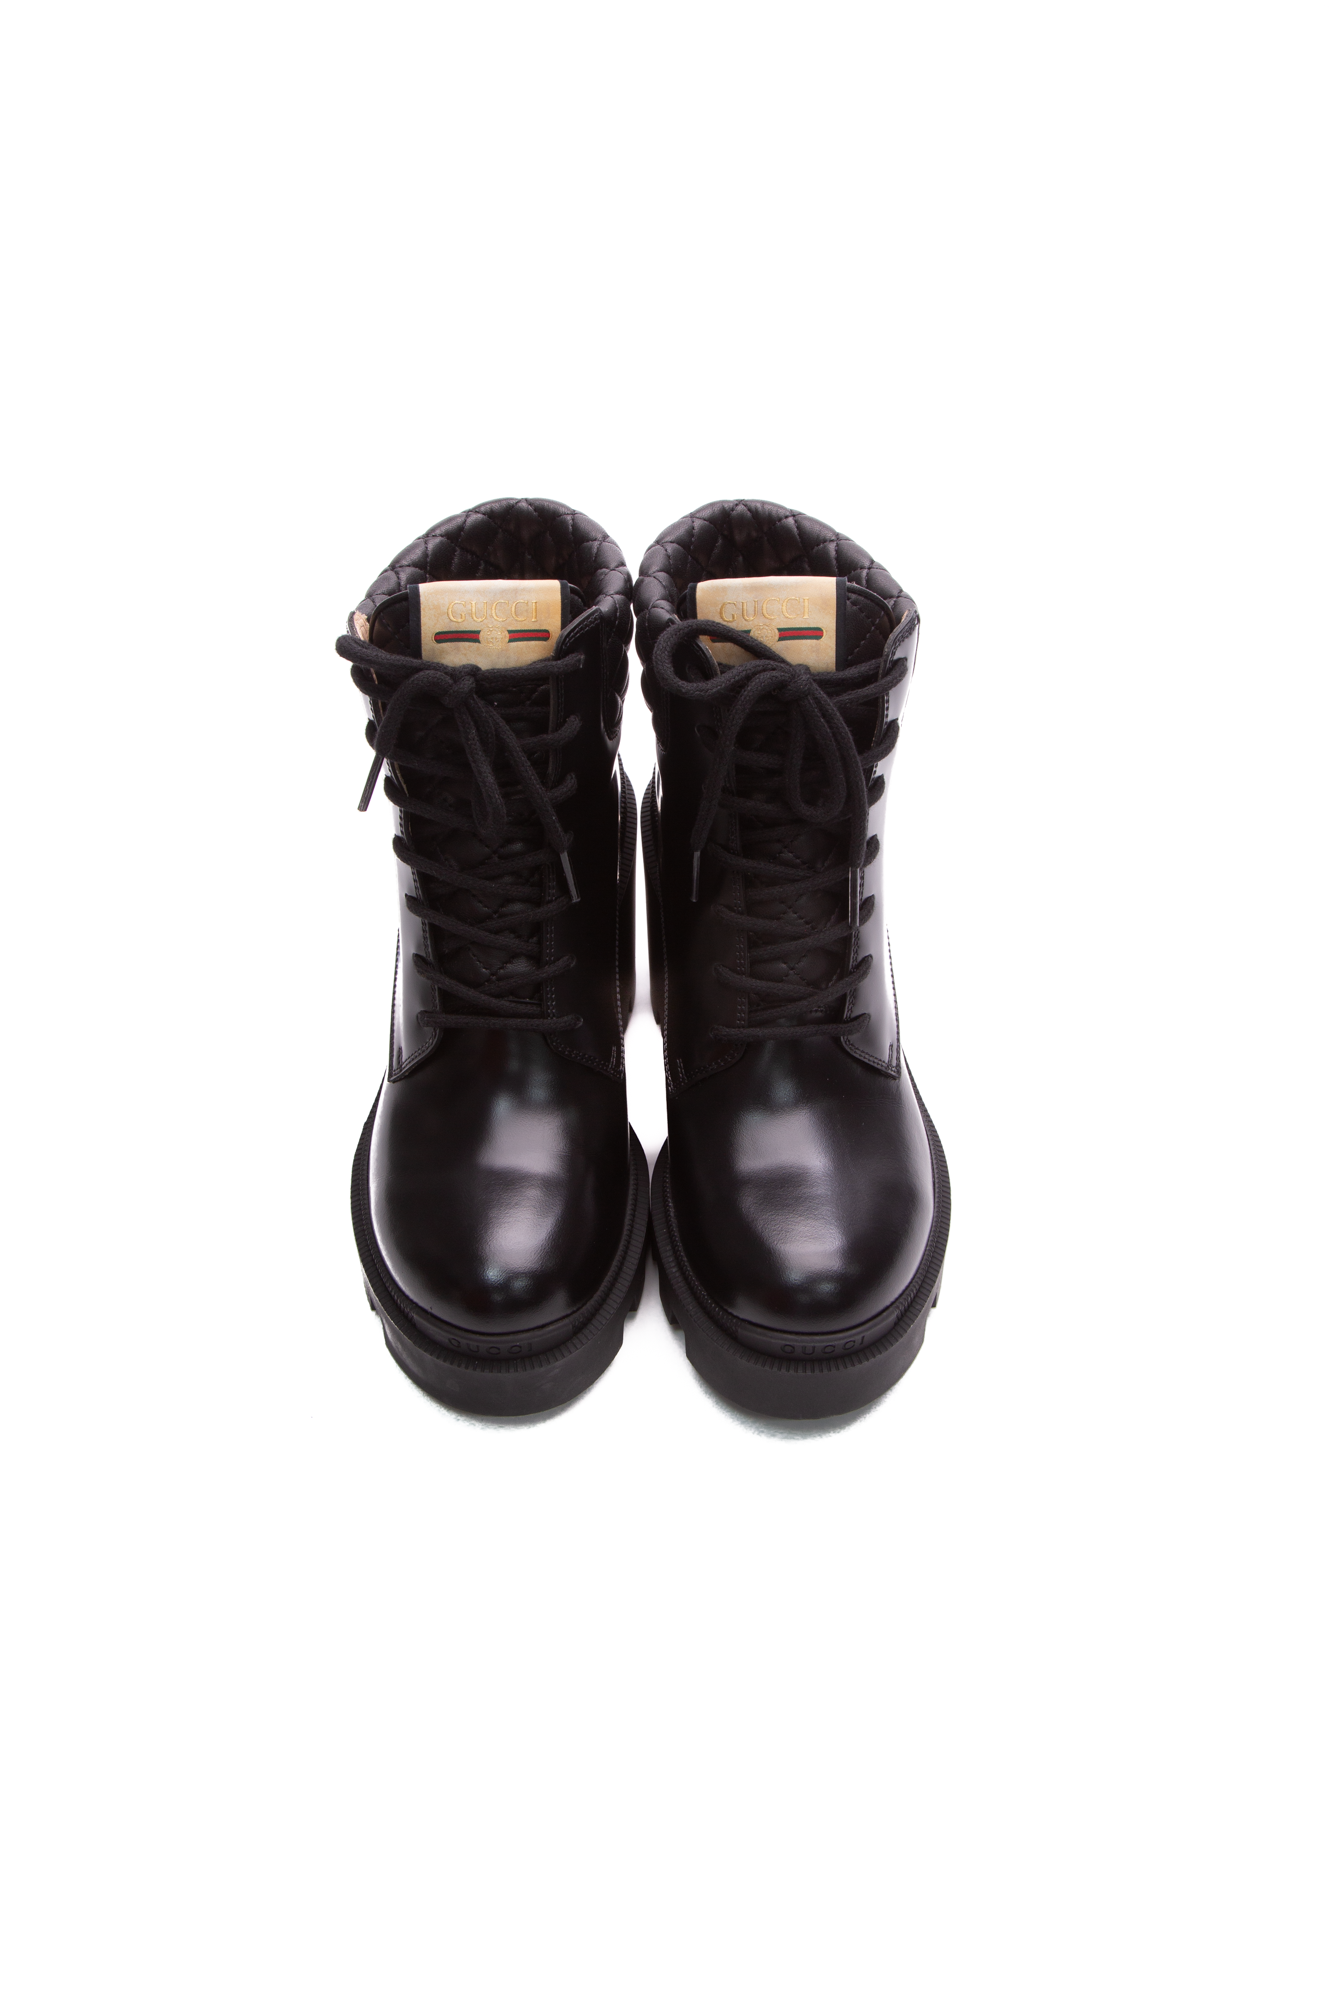 Gucci Quilted Trip Boots - Size 39